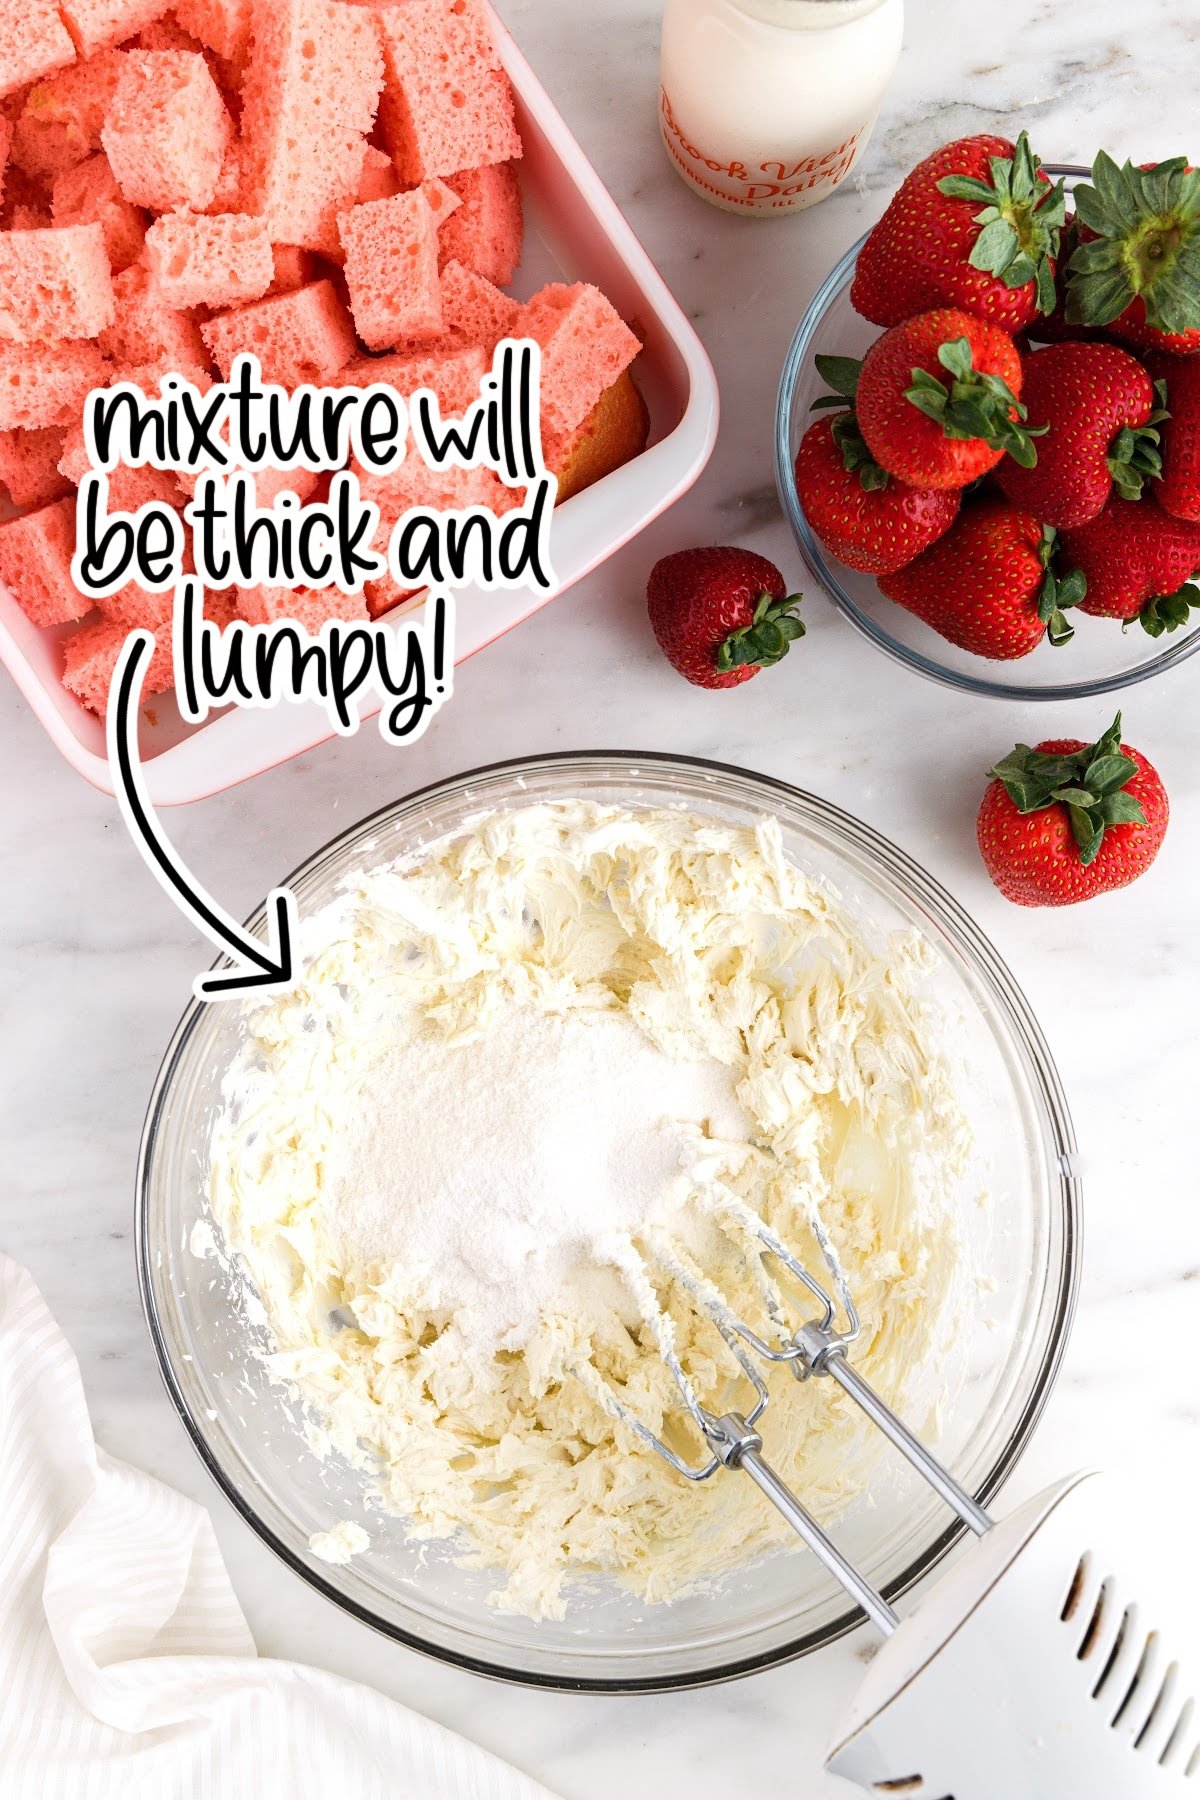 Blended cream cheese in glass mixing bowl with pudding powder added and text overlay "mixture will be thick and lumpy."